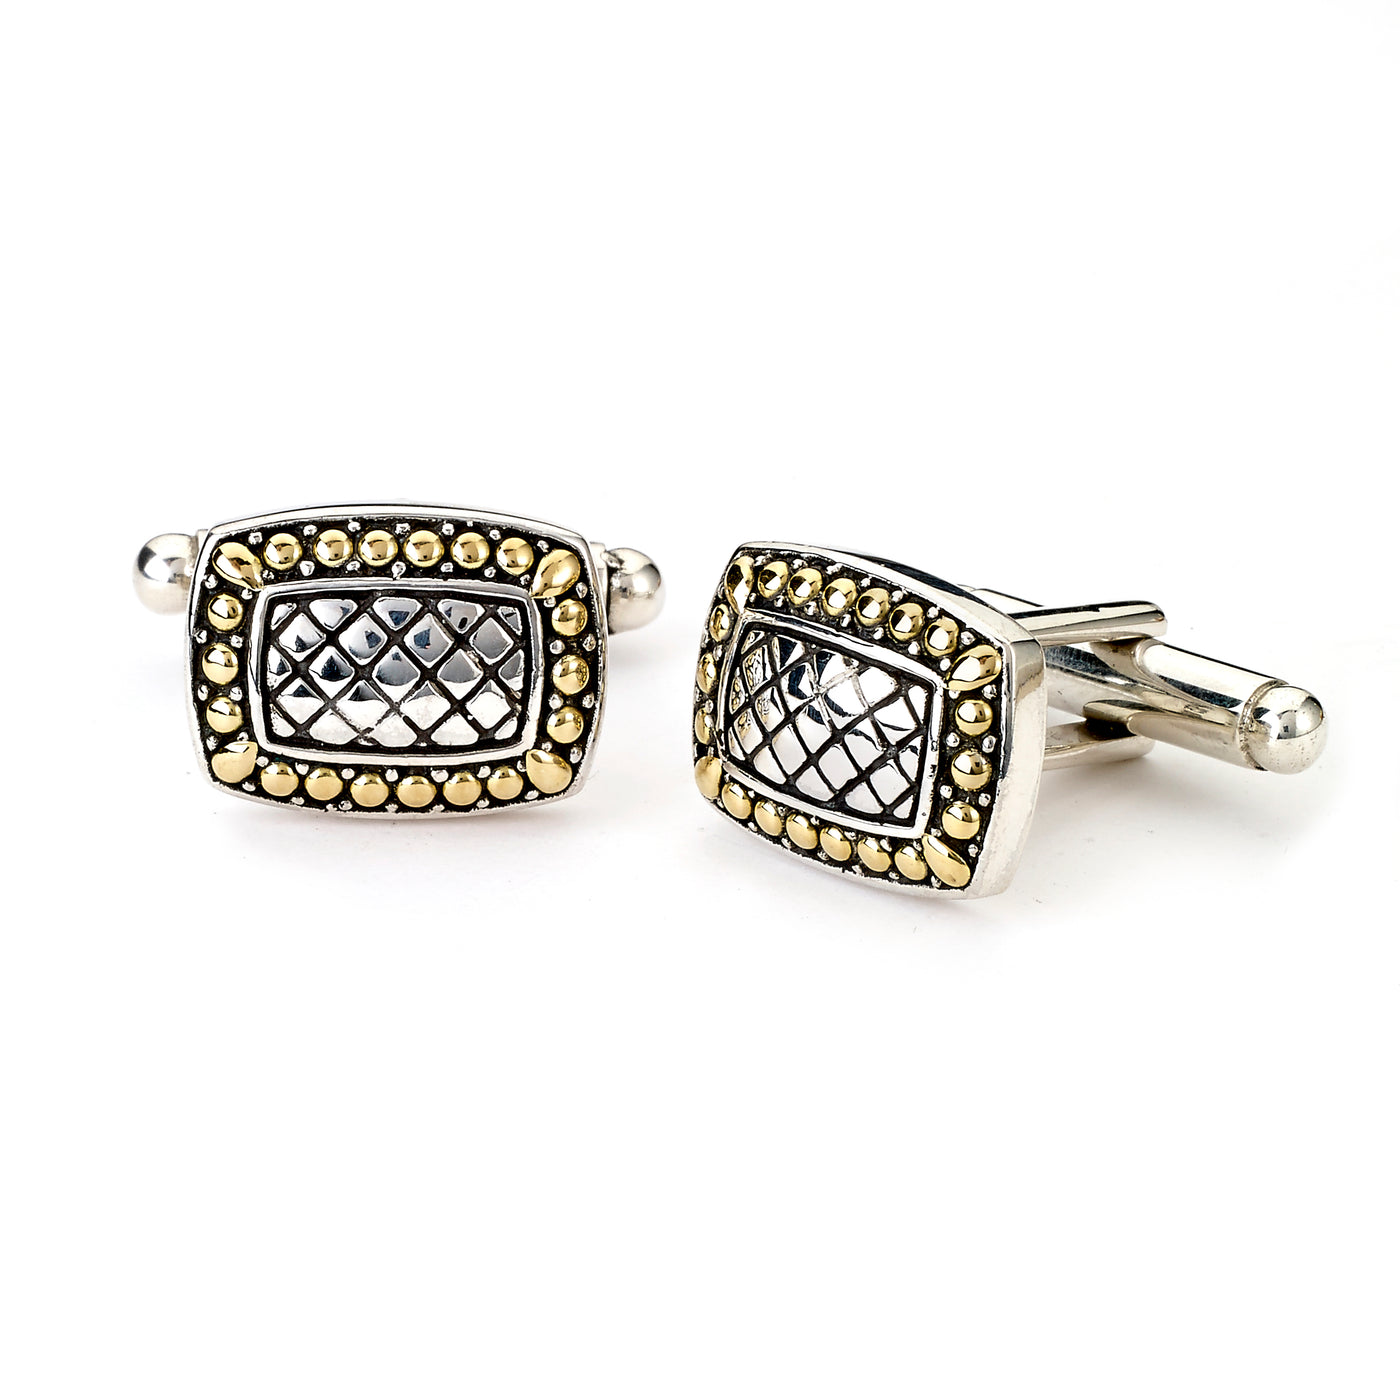 SS/18K RECTANGLE CHECKERBOARD CUFF LINKS